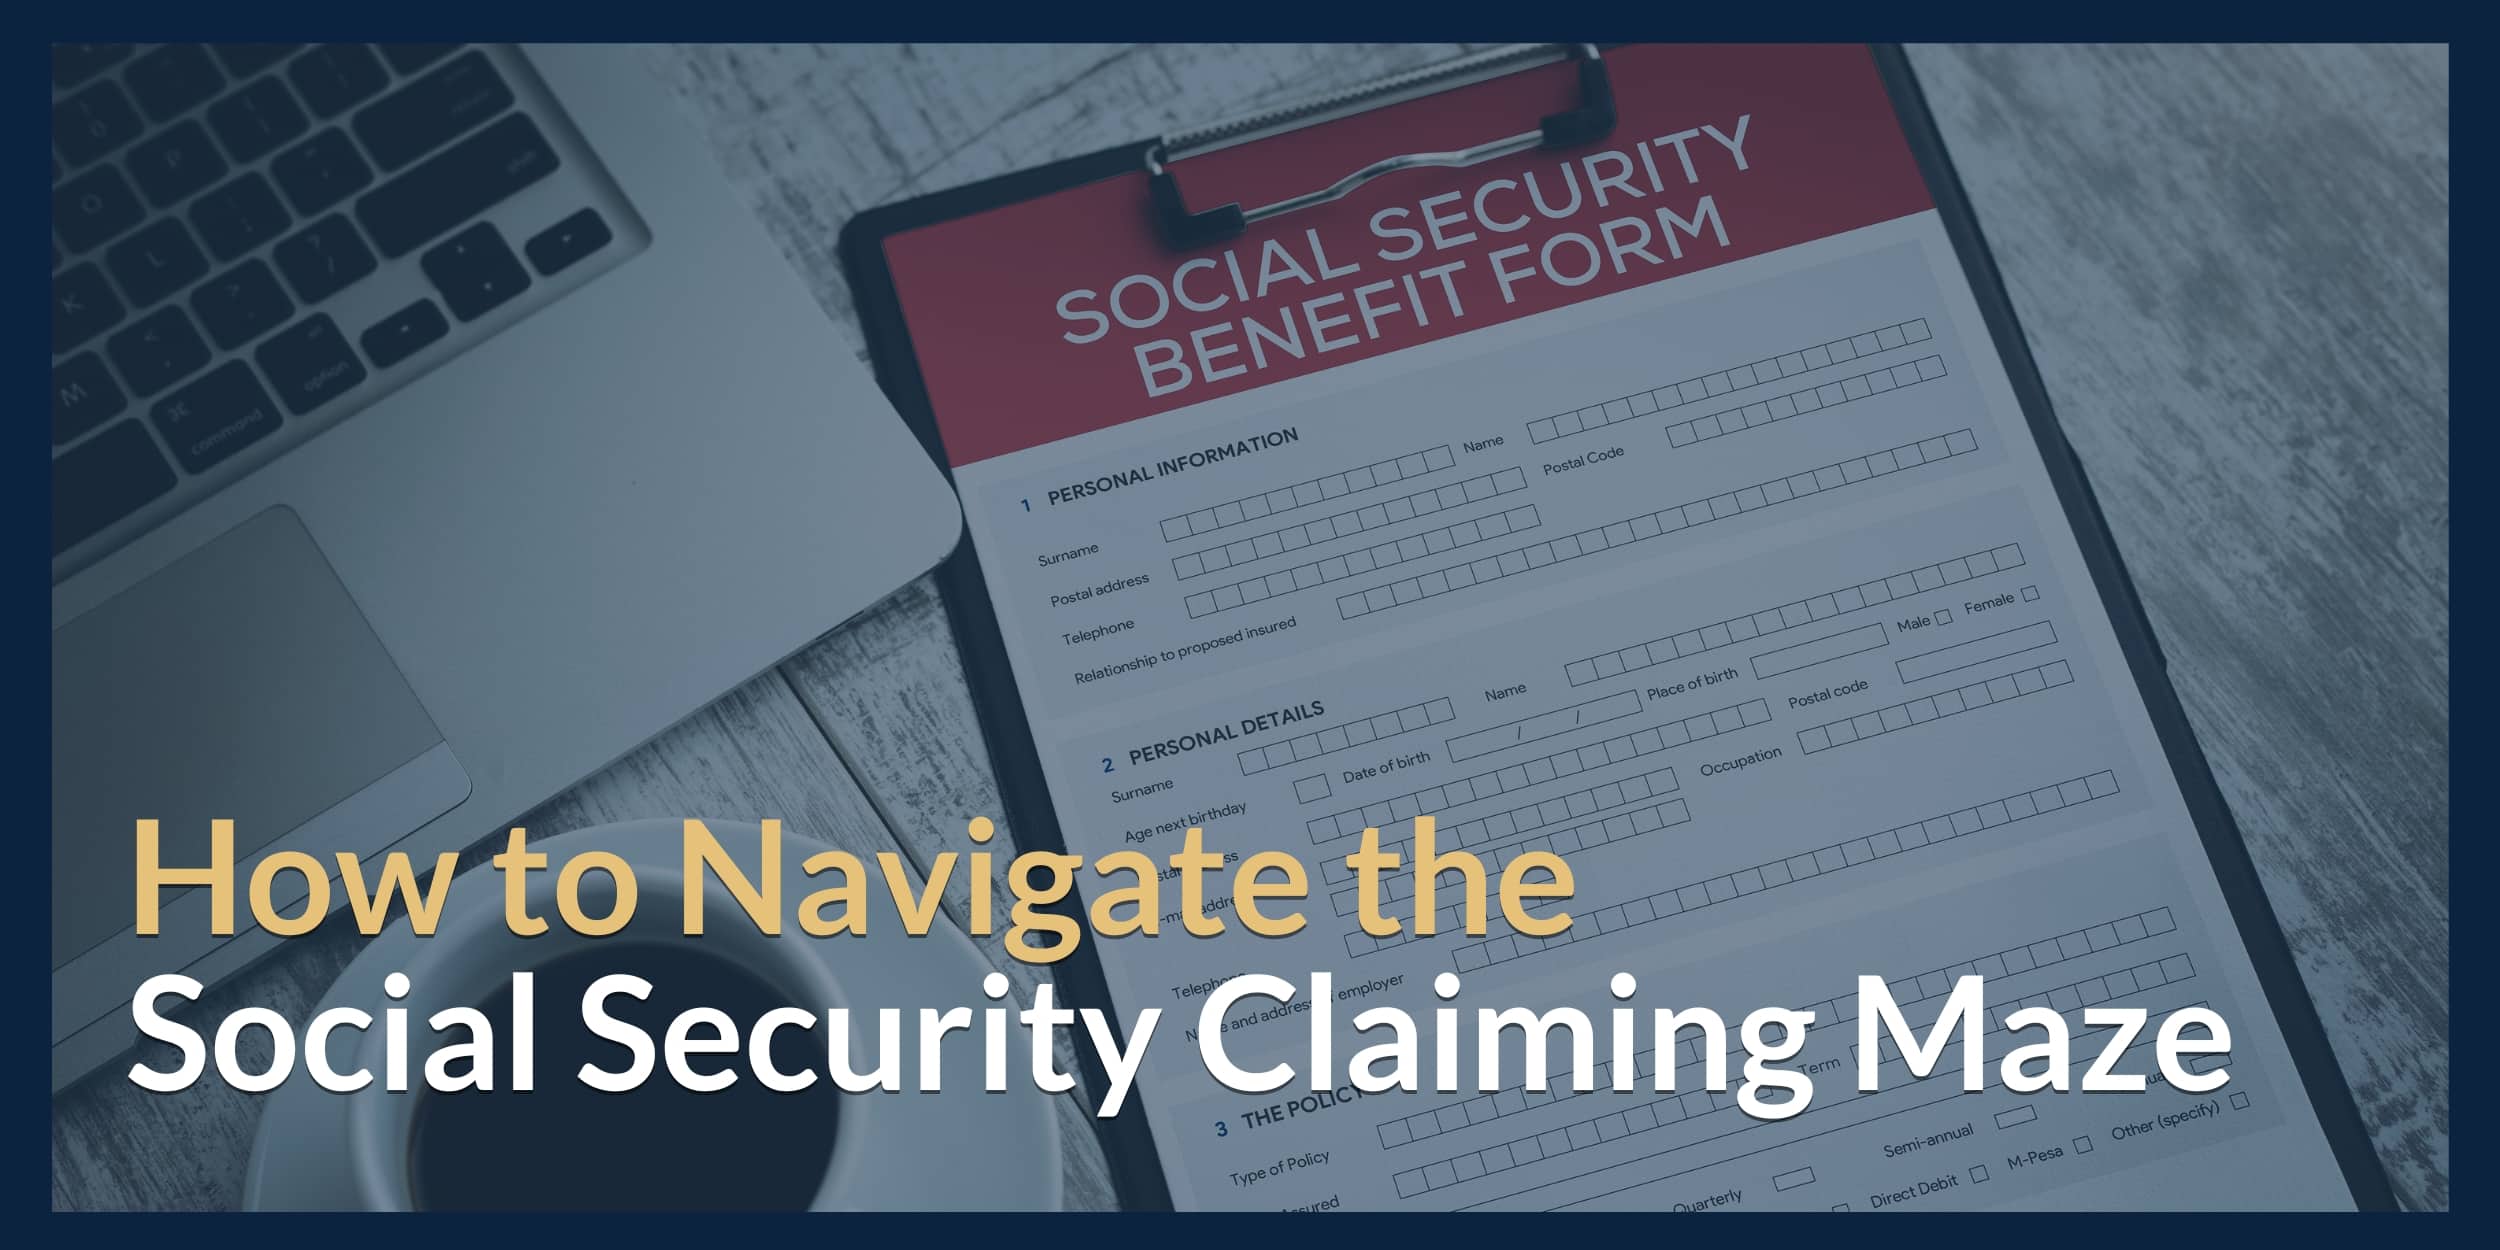 How to Navigate the Social Security Claiming Maze